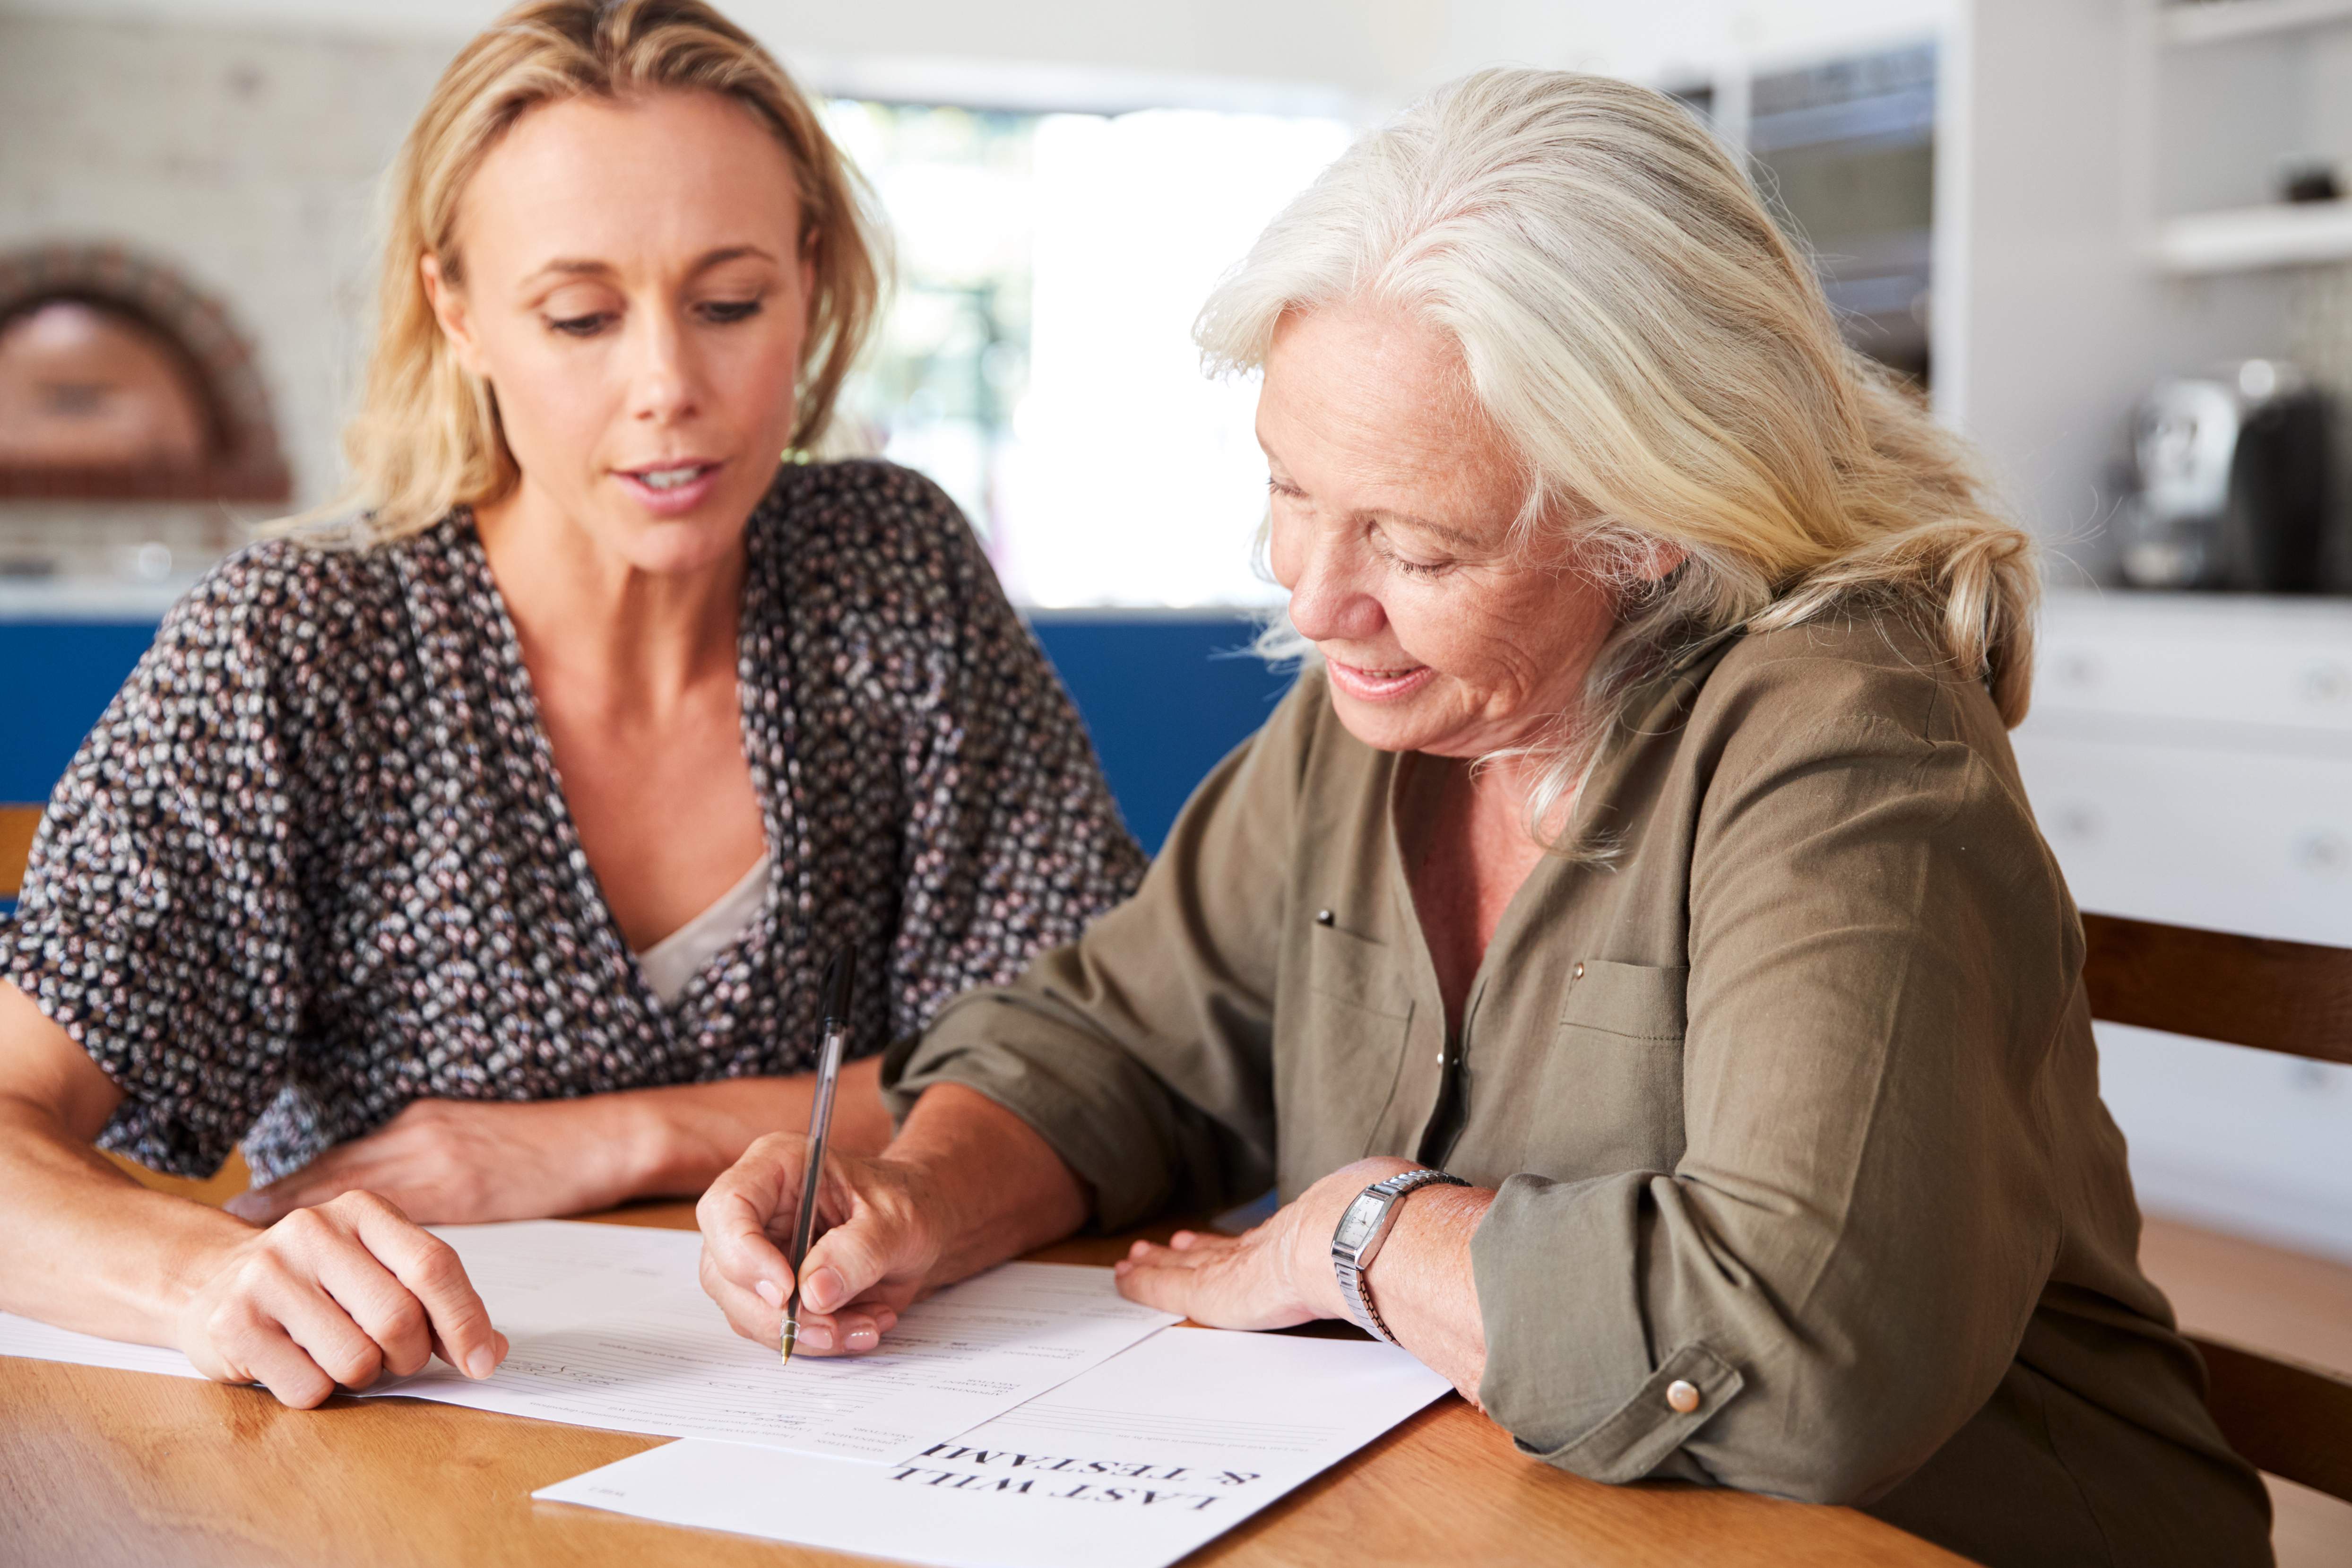 Two women seated at a table, looking at paperwork together. Based on blog content, the paper is about wills and/or trusts. 